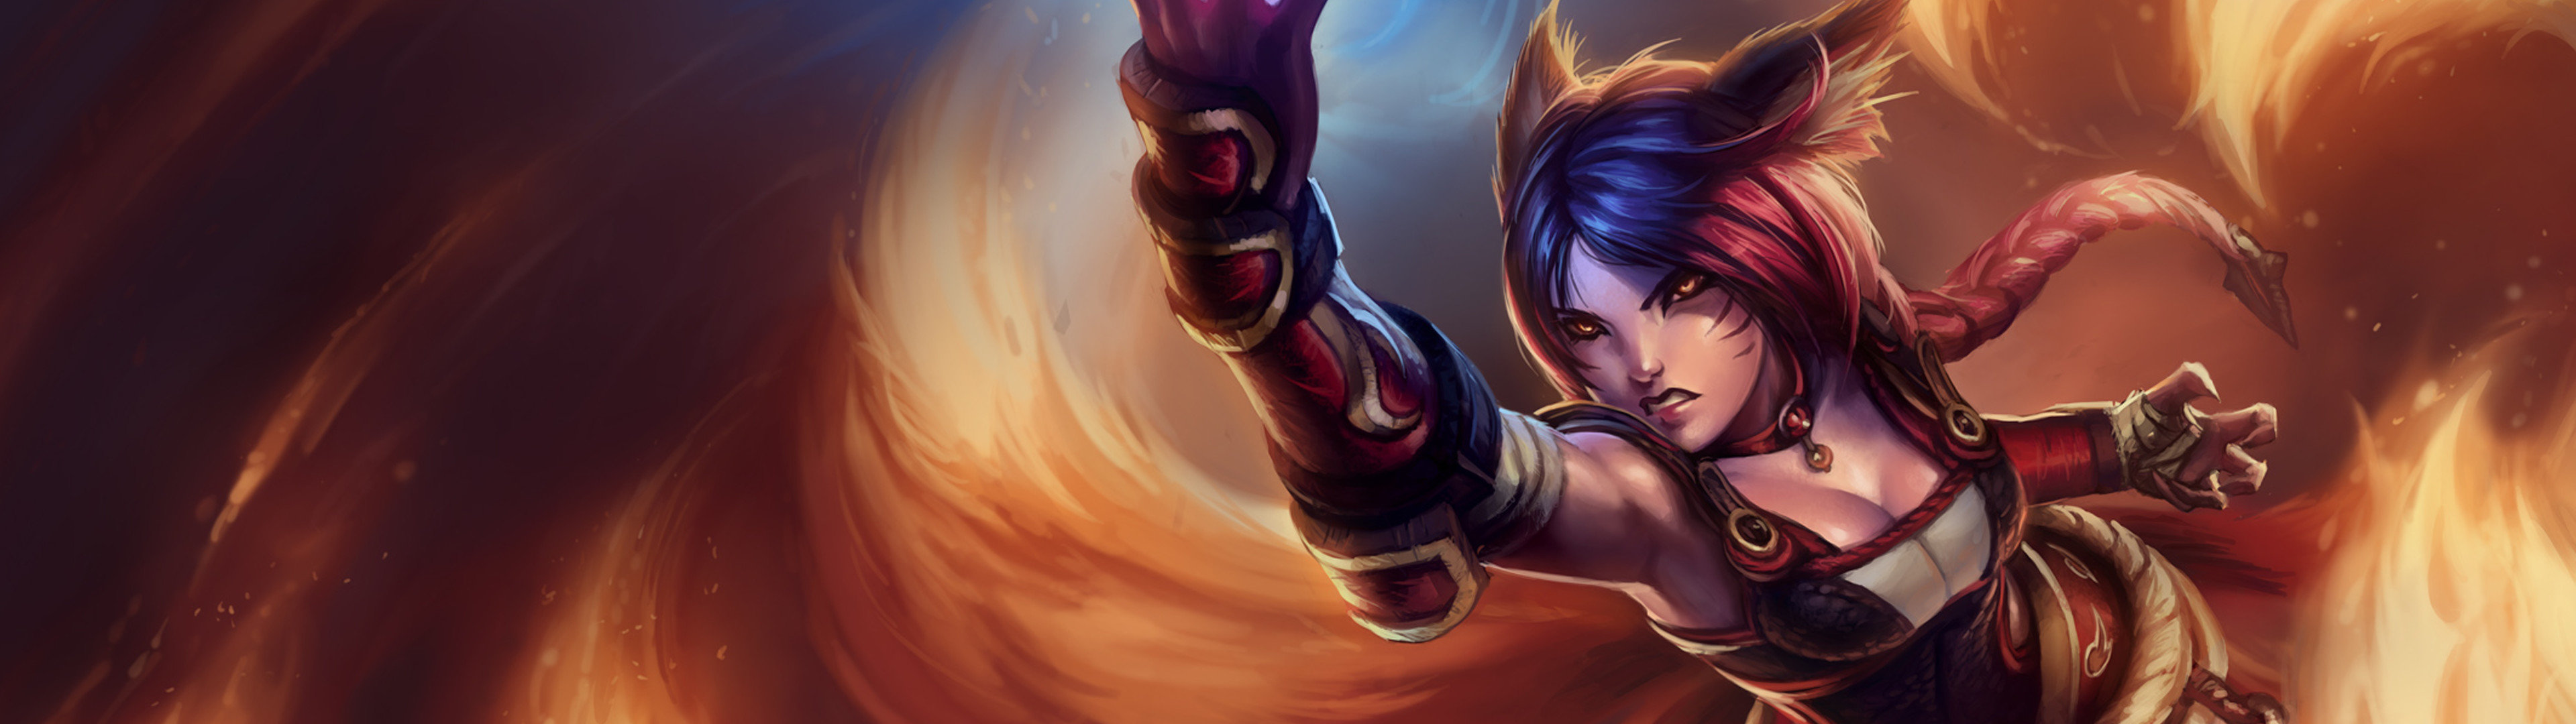 Awesome Ahri Free Wallpaper Id - League Of Legends Wallpaper Ahri - HD Wallpaper 